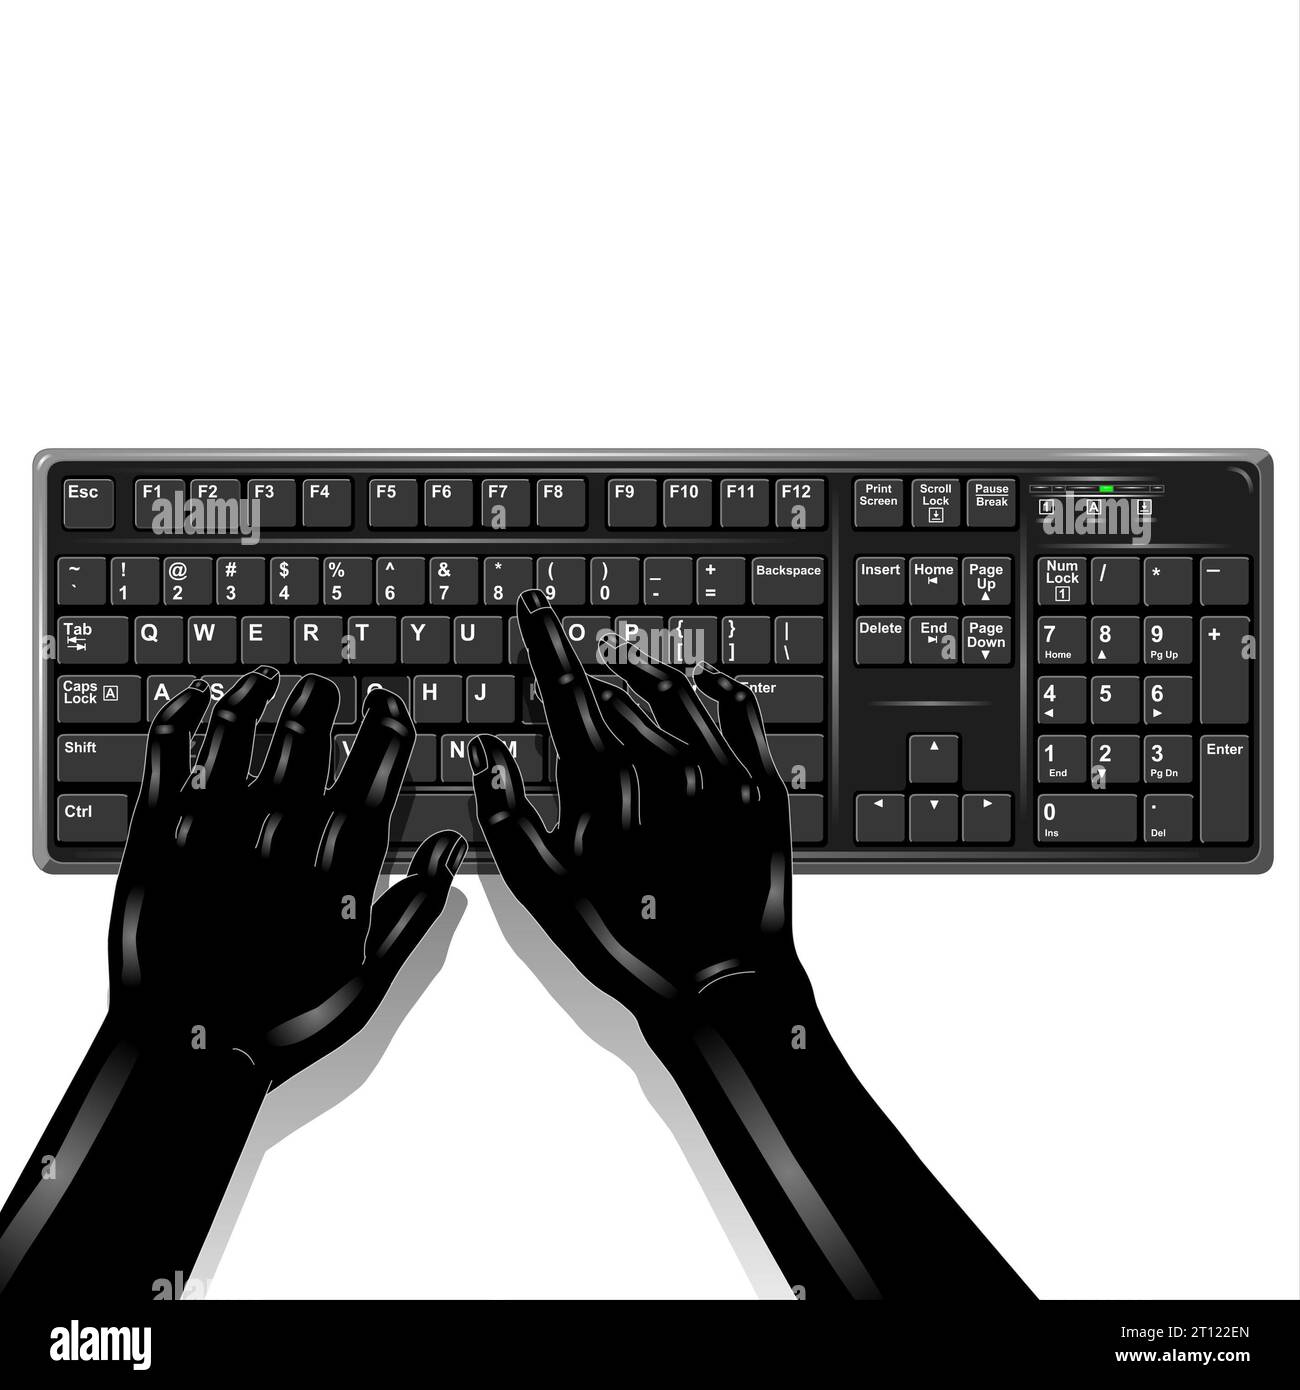 Hands typing on a computer keyboard. Vector illustration isolated on white background Stock Photo